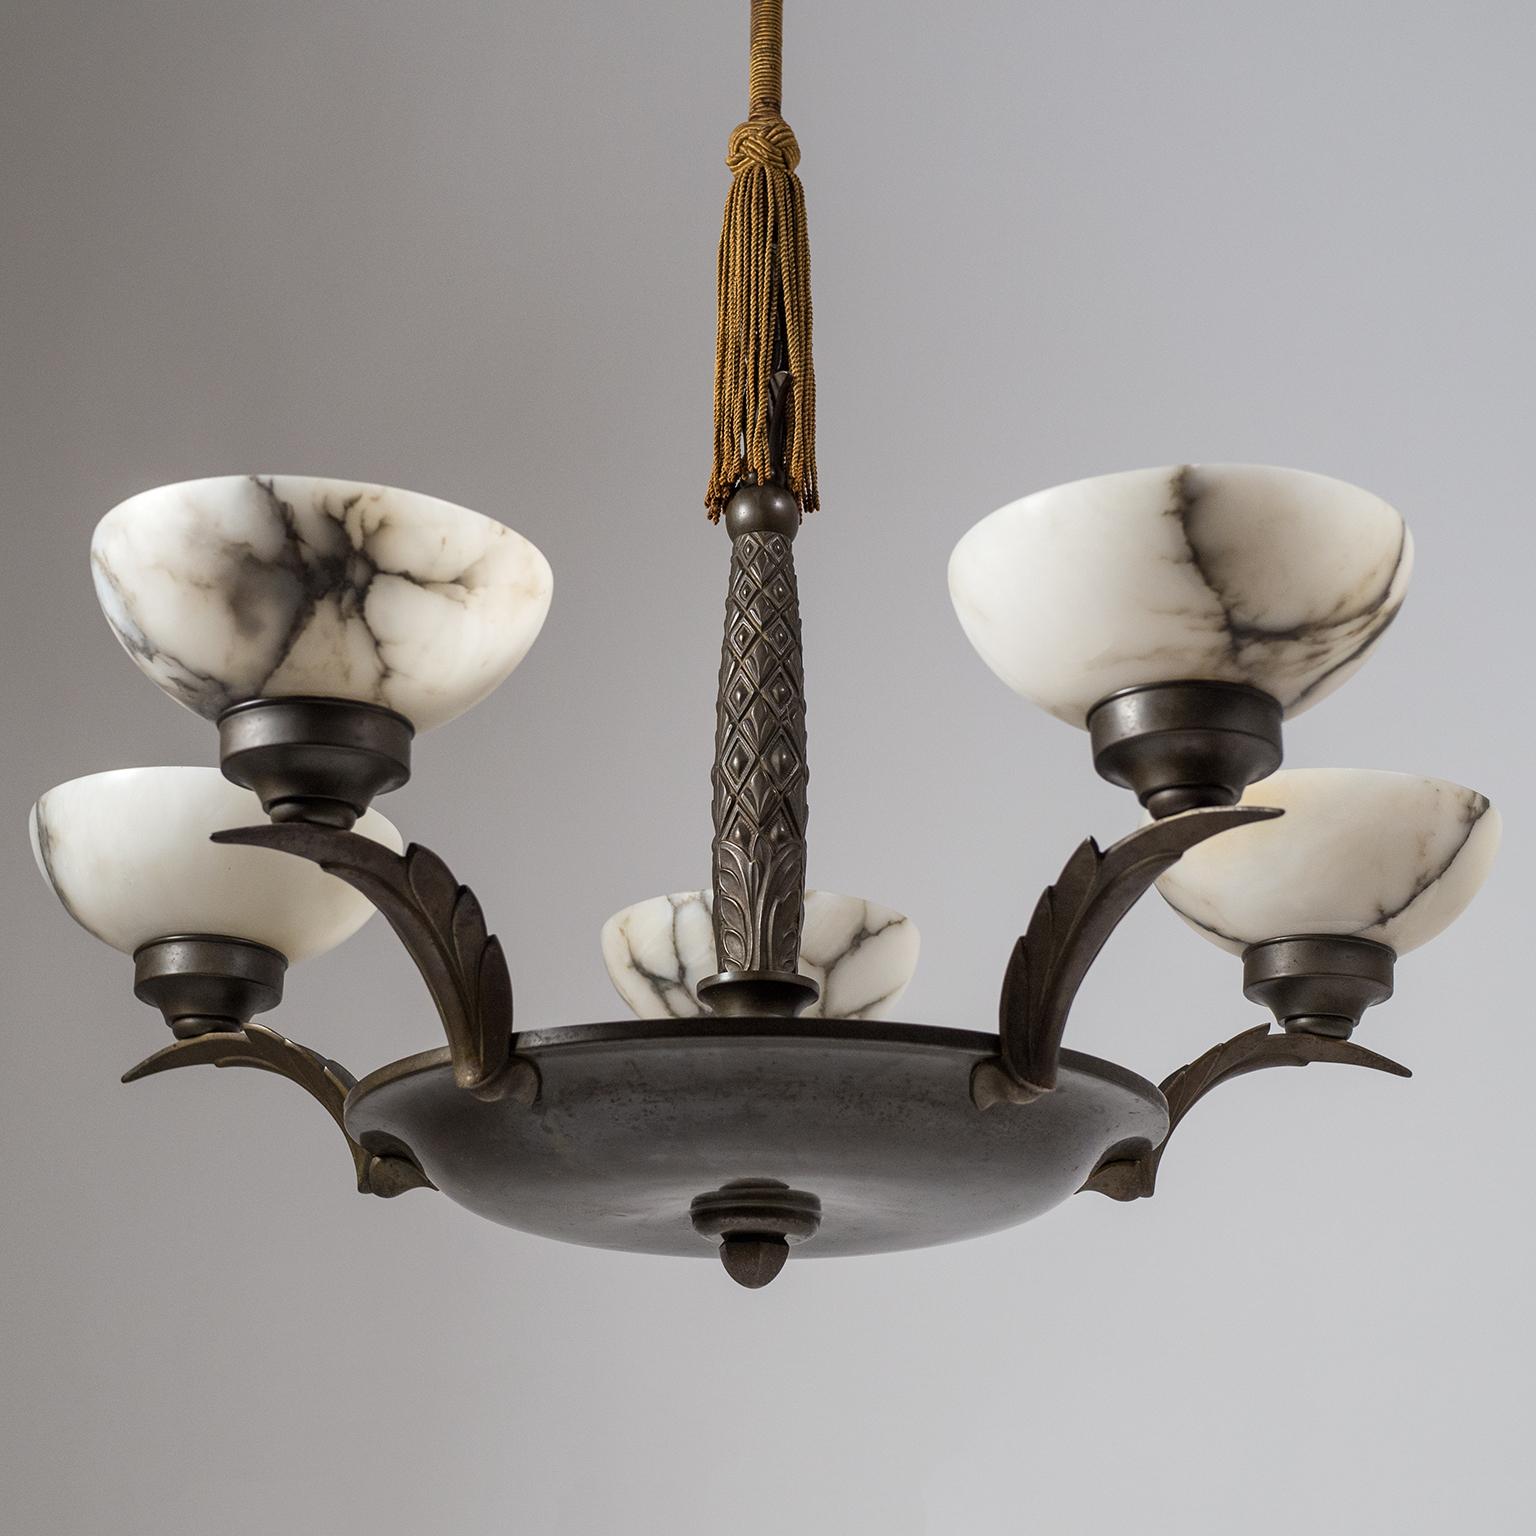 Early 20th Century Art Deco Bronze and Alabaster Chandelier, circa 1920